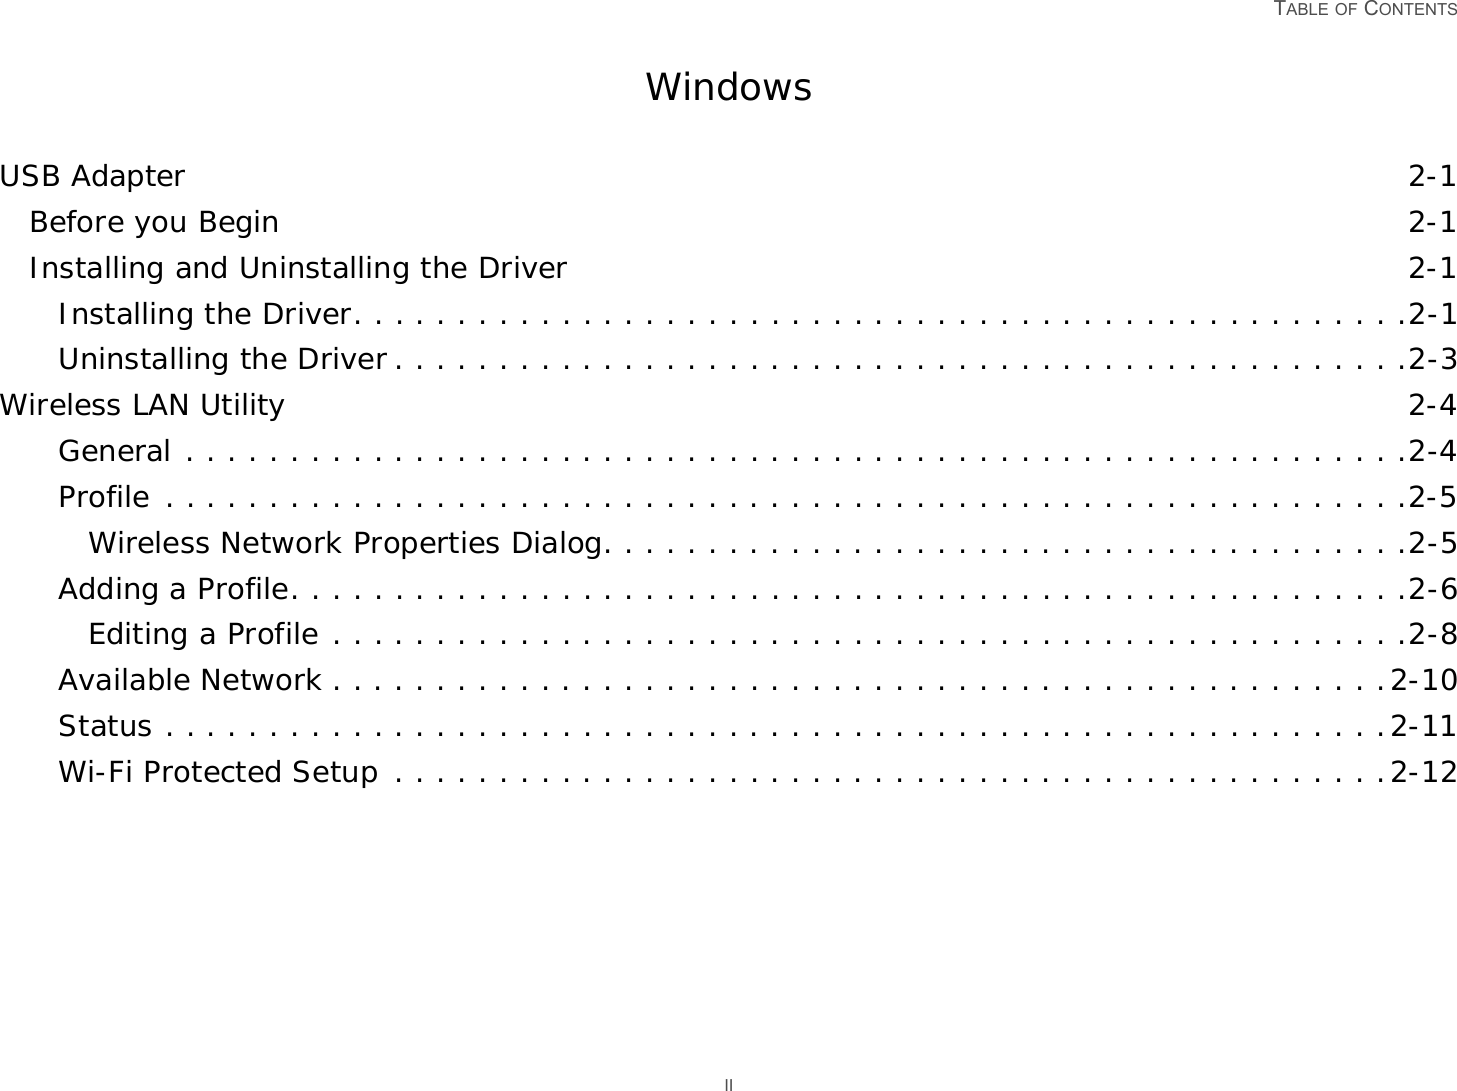 TABLE OF CONTENTS IIWindowsUSB Adapter 2-1Before you Begin 2-1Installing and Uninstalling the Driver 2-1Installing the Driver. . . . . . . . . . . . . . . . . . . . . . . . . . . . . . . . . . . . . . . . . . . . . . . . . . .2-1Uninstalling the Driver . . . . . . . . . . . . . . . . . . . . . . . . . . . . . . . . . . . . . . . . . . . . . . . . .2-3Wireless LAN Utility 2-4General . . . . . . . . . . . . . . . . . . . . . . . . . . . . . . . . . . . . . . . . . . . . . . . . . . . . . . . . . . .2-4Profile . . . . . . . . . . . . . . . . . . . . . . . . . . . . . . . . . . . . . . . . . . . . . . . . . . . . . . . . . . . .2-5Wireless Network Properties Dialog. . . . . . . . . . . . . . . . . . . . . . . . . . . . . . . . . . . . . . .2-5Adding a Profile. . . . . . . . . . . . . . . . . . . . . . . . . . . . . . . . . . . . . . . . . . . . . . . . . . . . . .2-6Editing a Profile . . . . . . . . . . . . . . . . . . . . . . . . . . . . . . . . . . . . . . . . . . . . . . . . . . . .2-8Available Network . . . . . . . . . . . . . . . . . . . . . . . . . . . . . . . . . . . . . . . . . . . . . . . . . . .2-10Status . . . . . . . . . . . . . . . . . . . . . . . . . . . . . . . . . . . . . . . . . . . . . . . . . . . . . . . . . . .2-11Wi-Fi Protected Setup  . . . . . . . . . . . . . . . . . . . . . . . . . . . . . . . . . . . . . . . . . . . . . . . .2-12